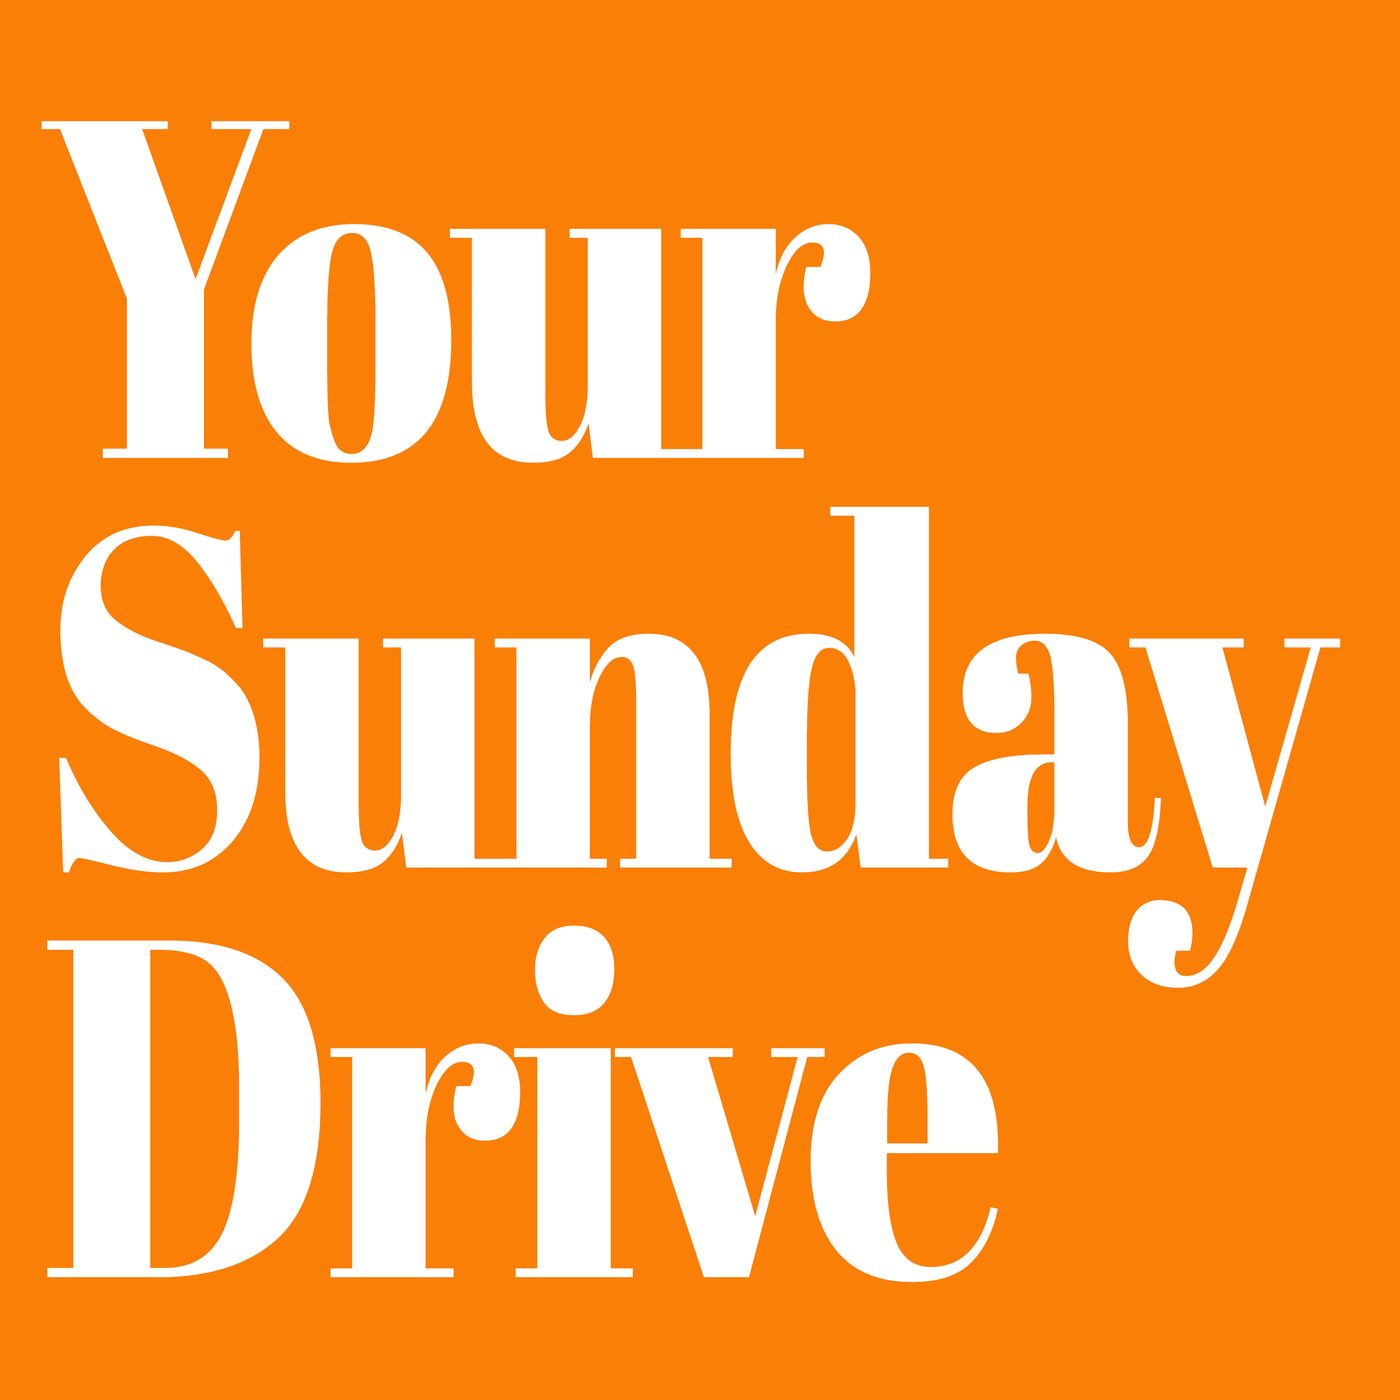 Your Sunday Drive 5.10 - It's the Final Podcast!